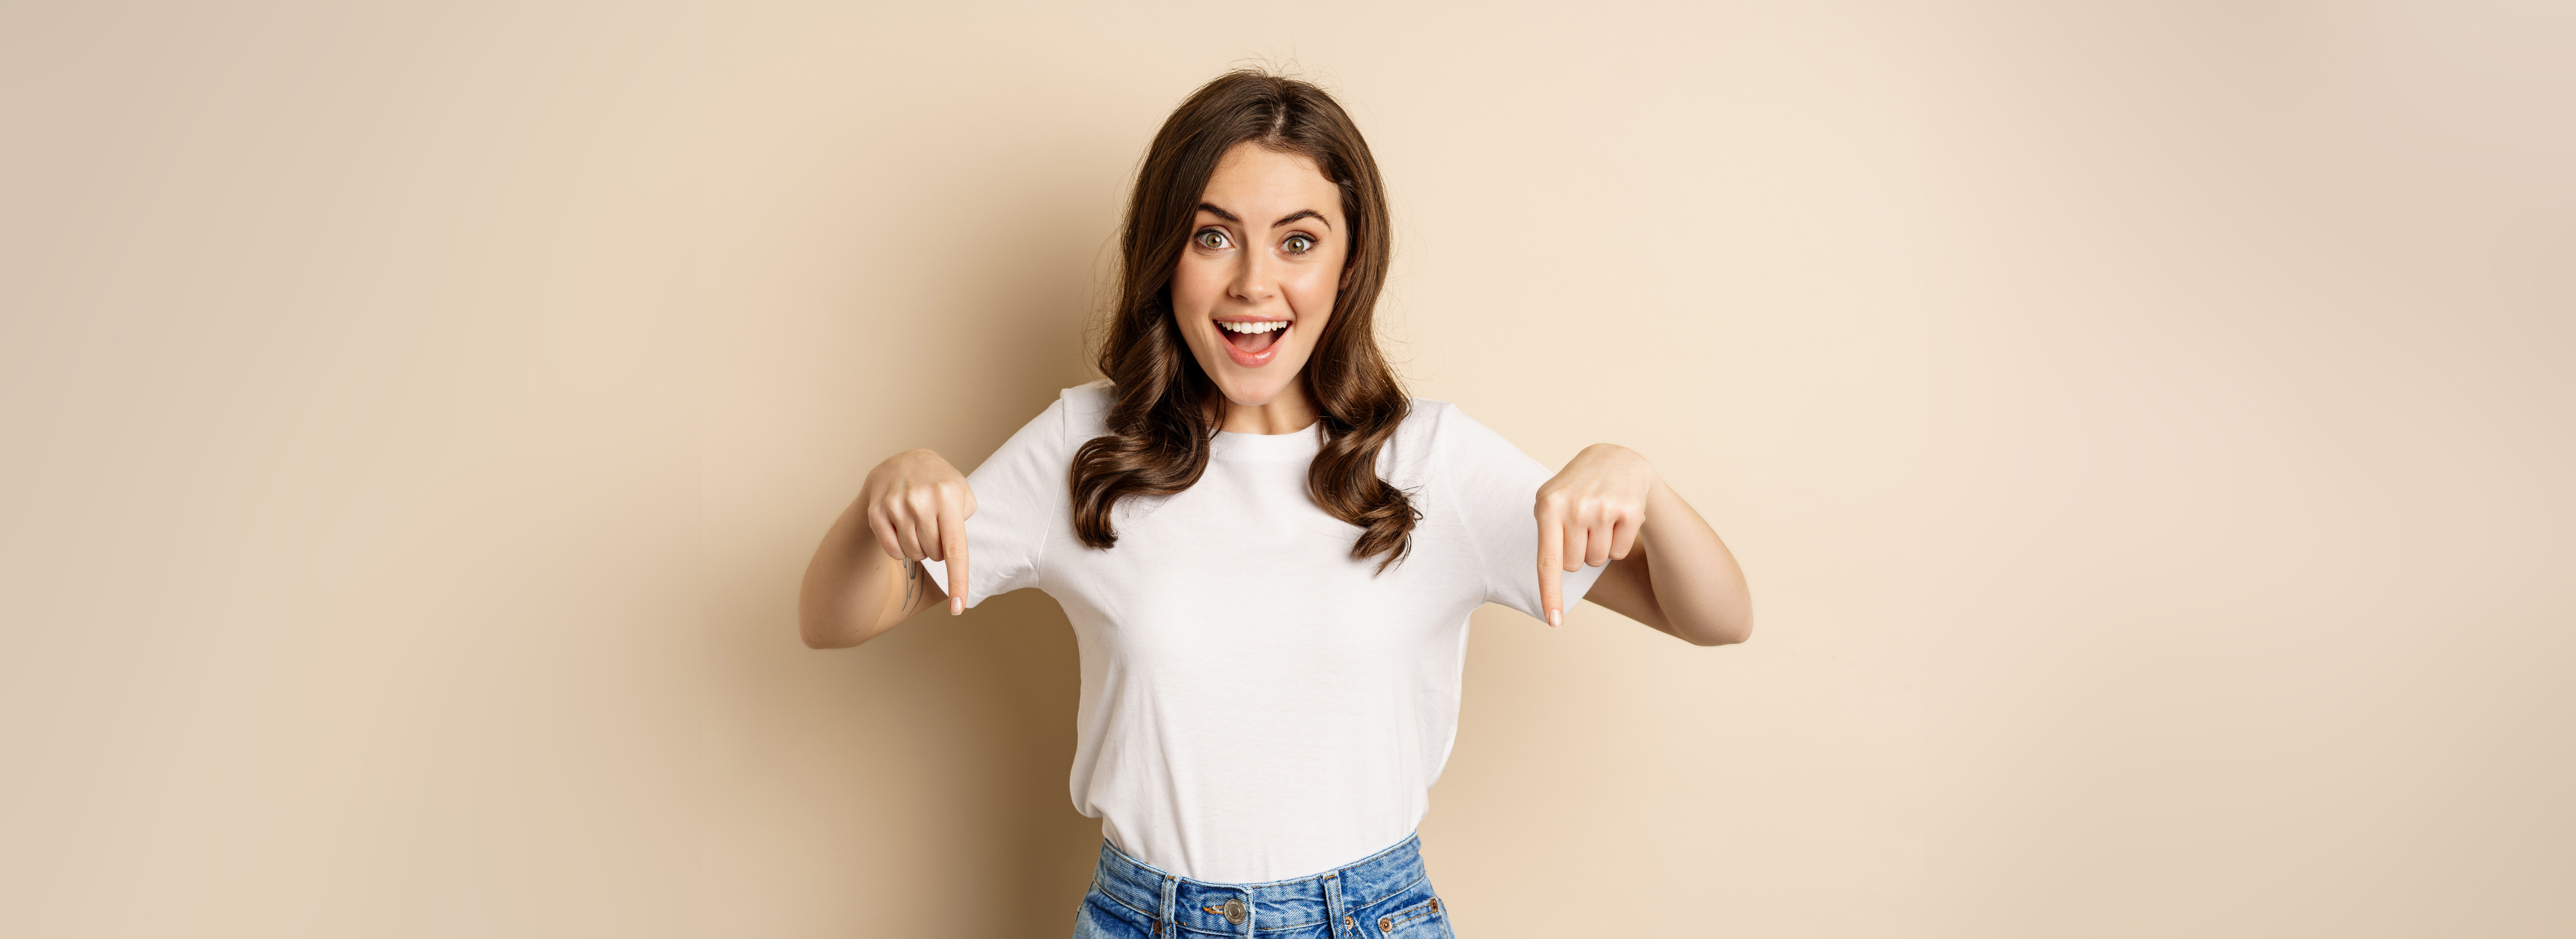 Smiling Happy Girl Pointing Fingers down and Showing Banner, Company Logo below, Click Link, Standing over Beige Background